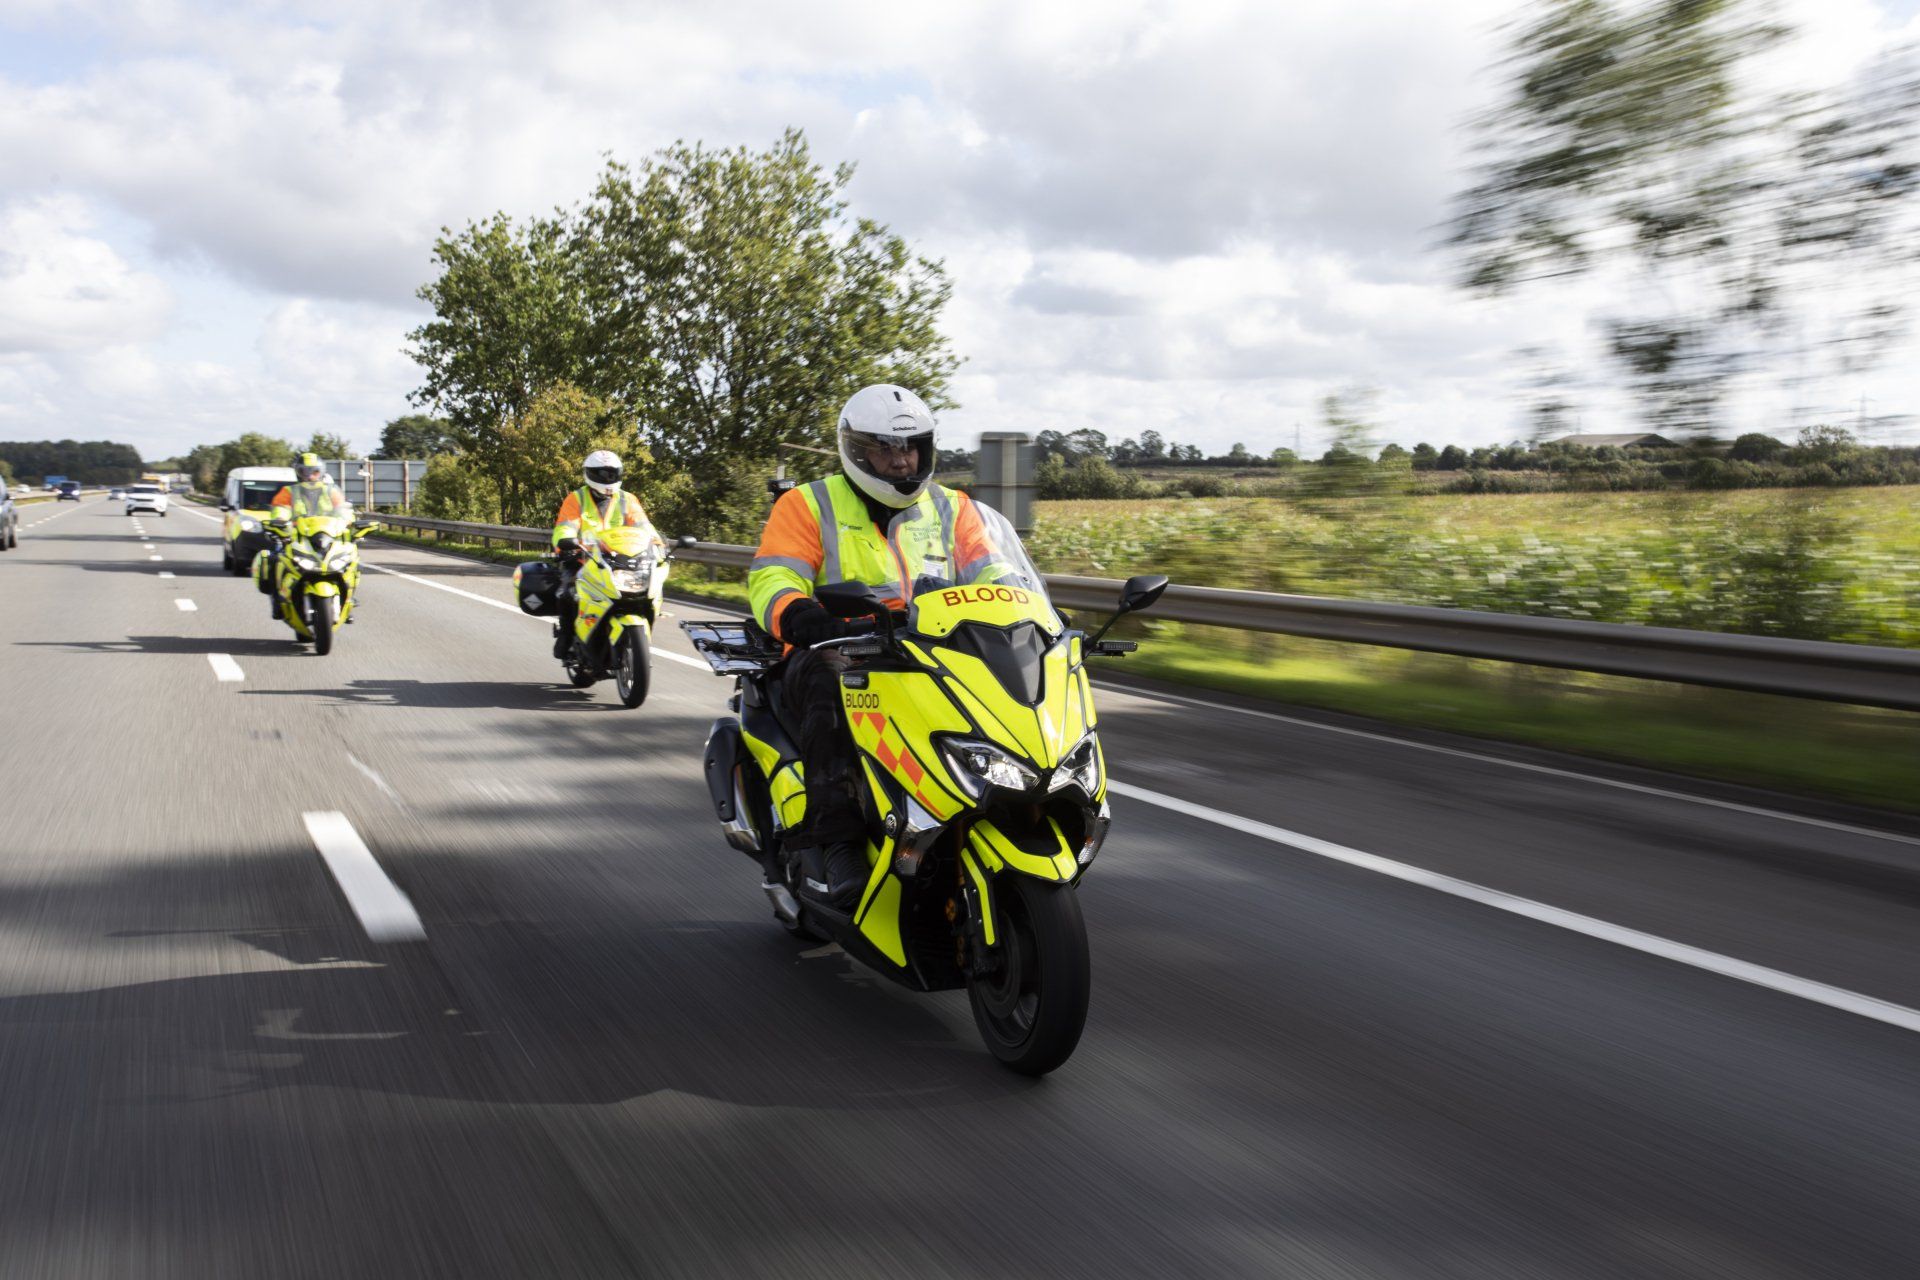 The Randal Charitable Foundation proudly supports Leicestershire & Rutland Blood Bikes